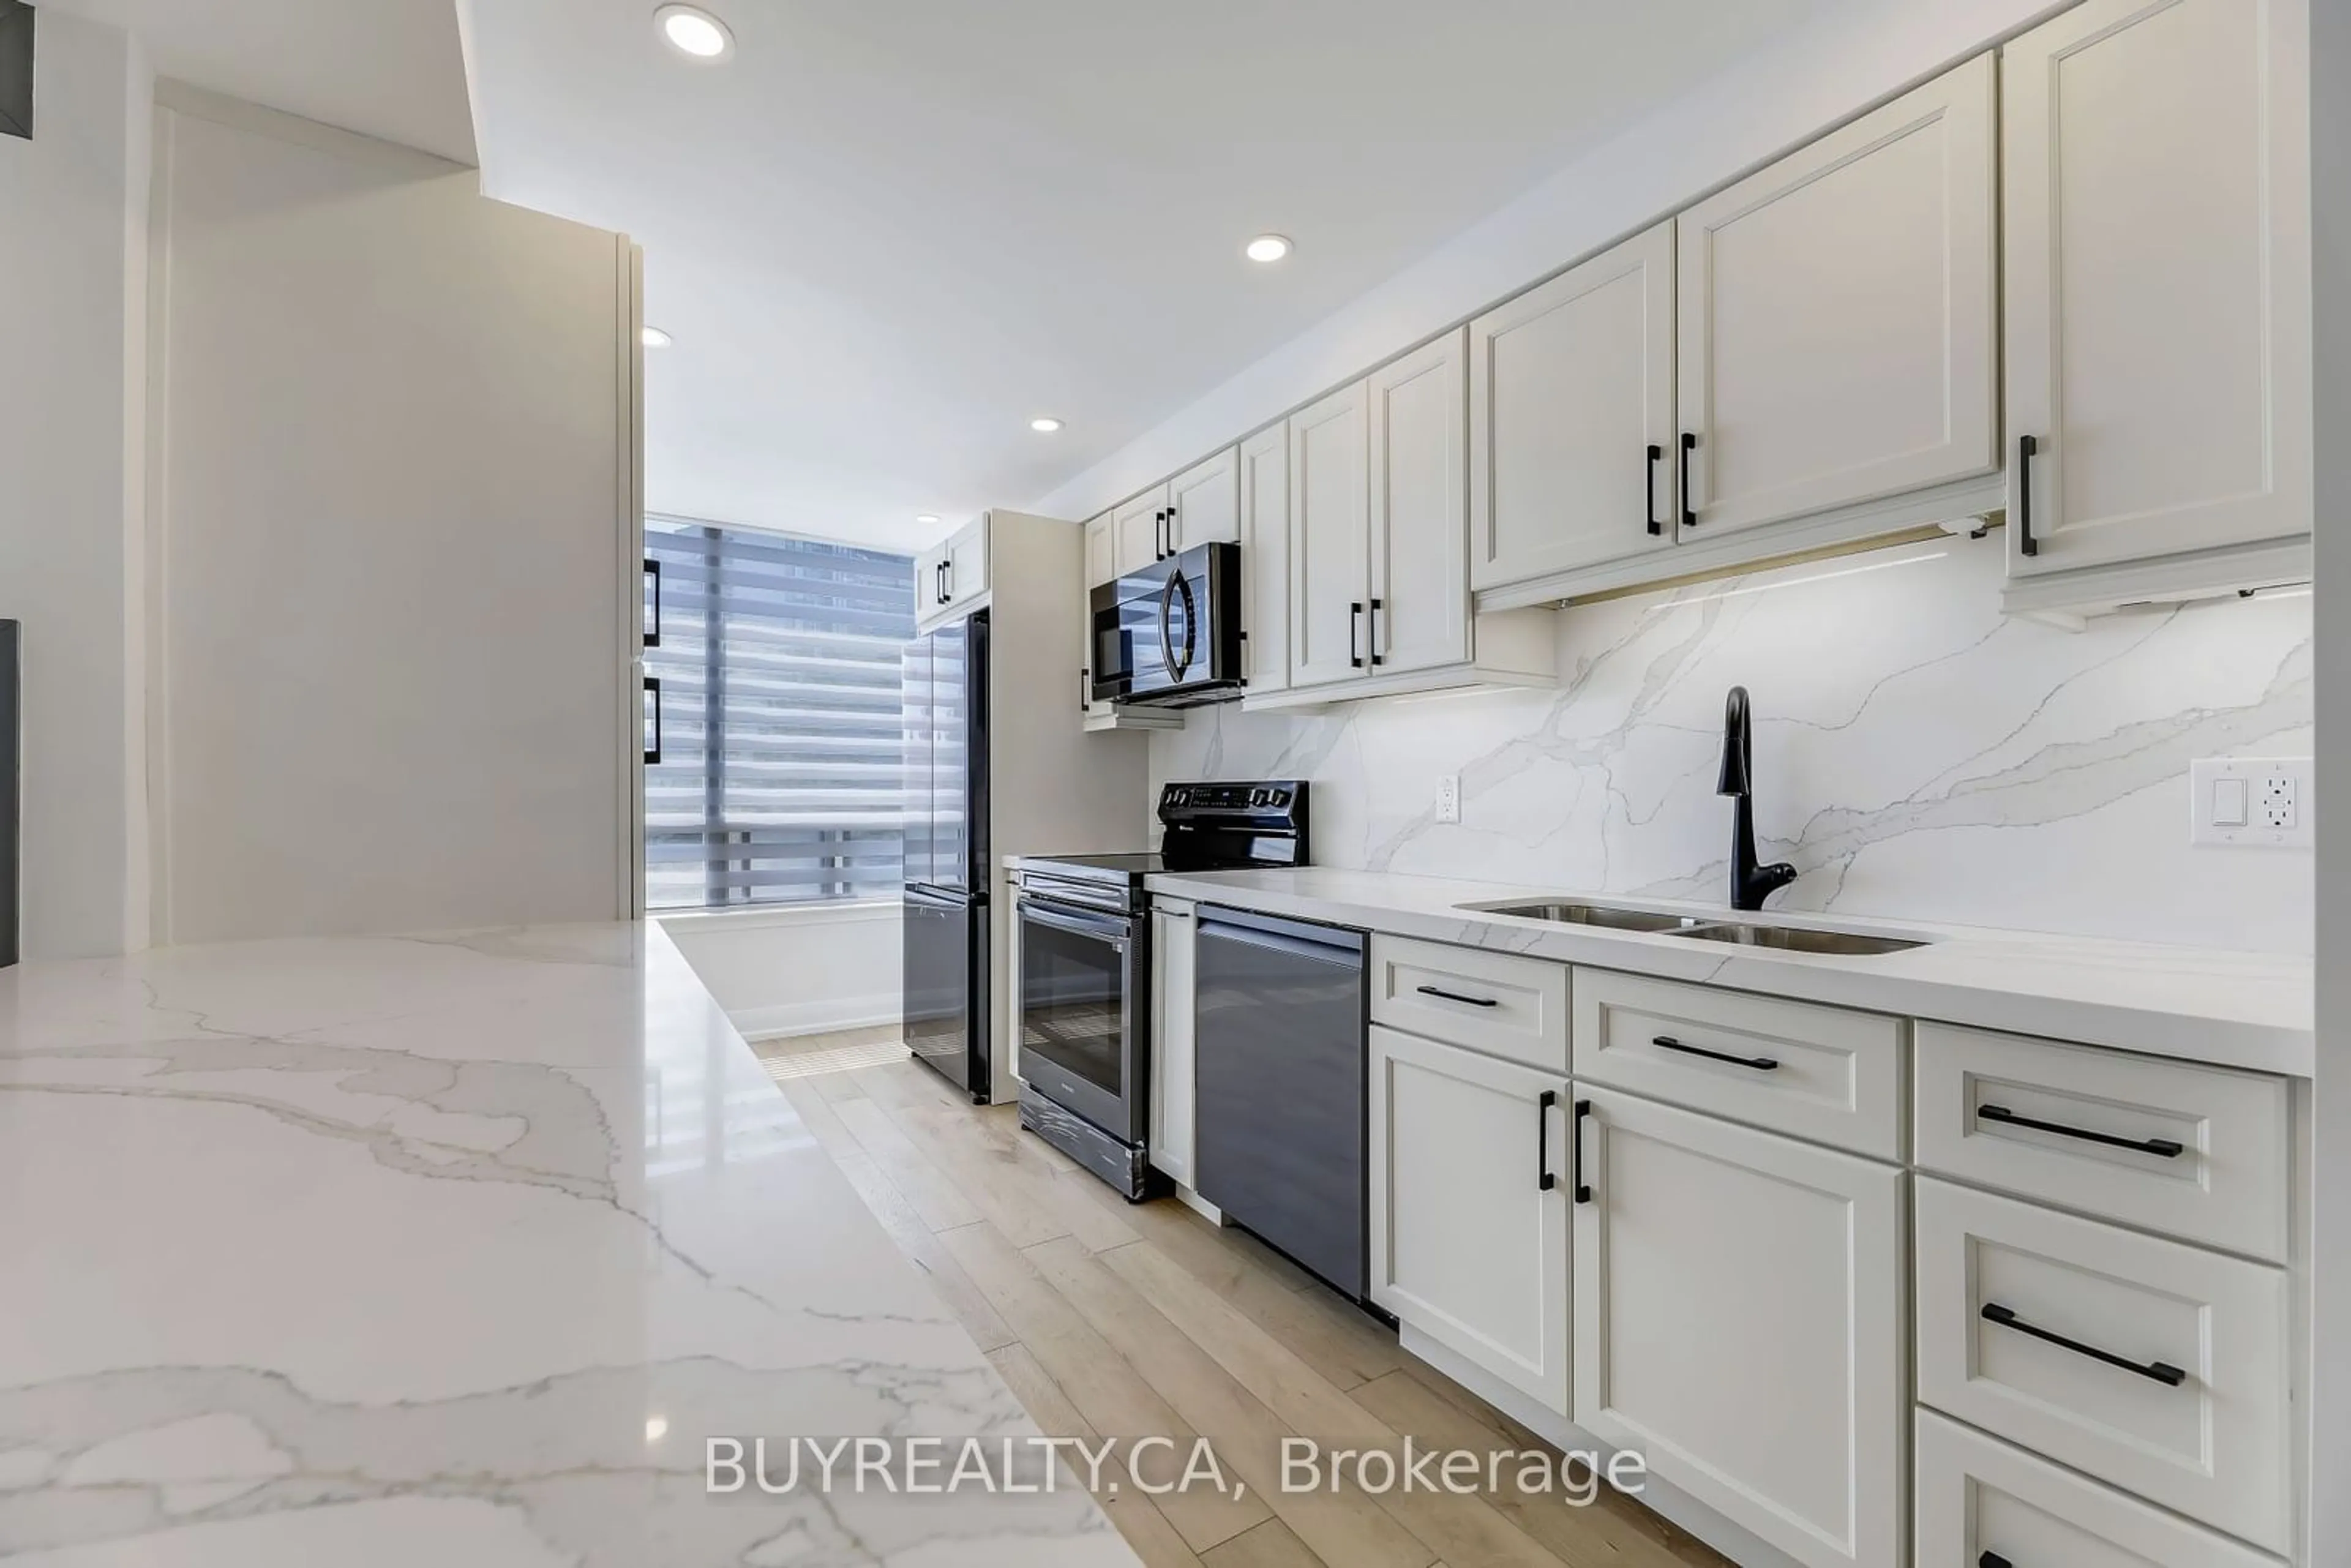 Contemporary kitchen for 1131 Steeles Ave #410, Toronto Ontario M2R 3W8